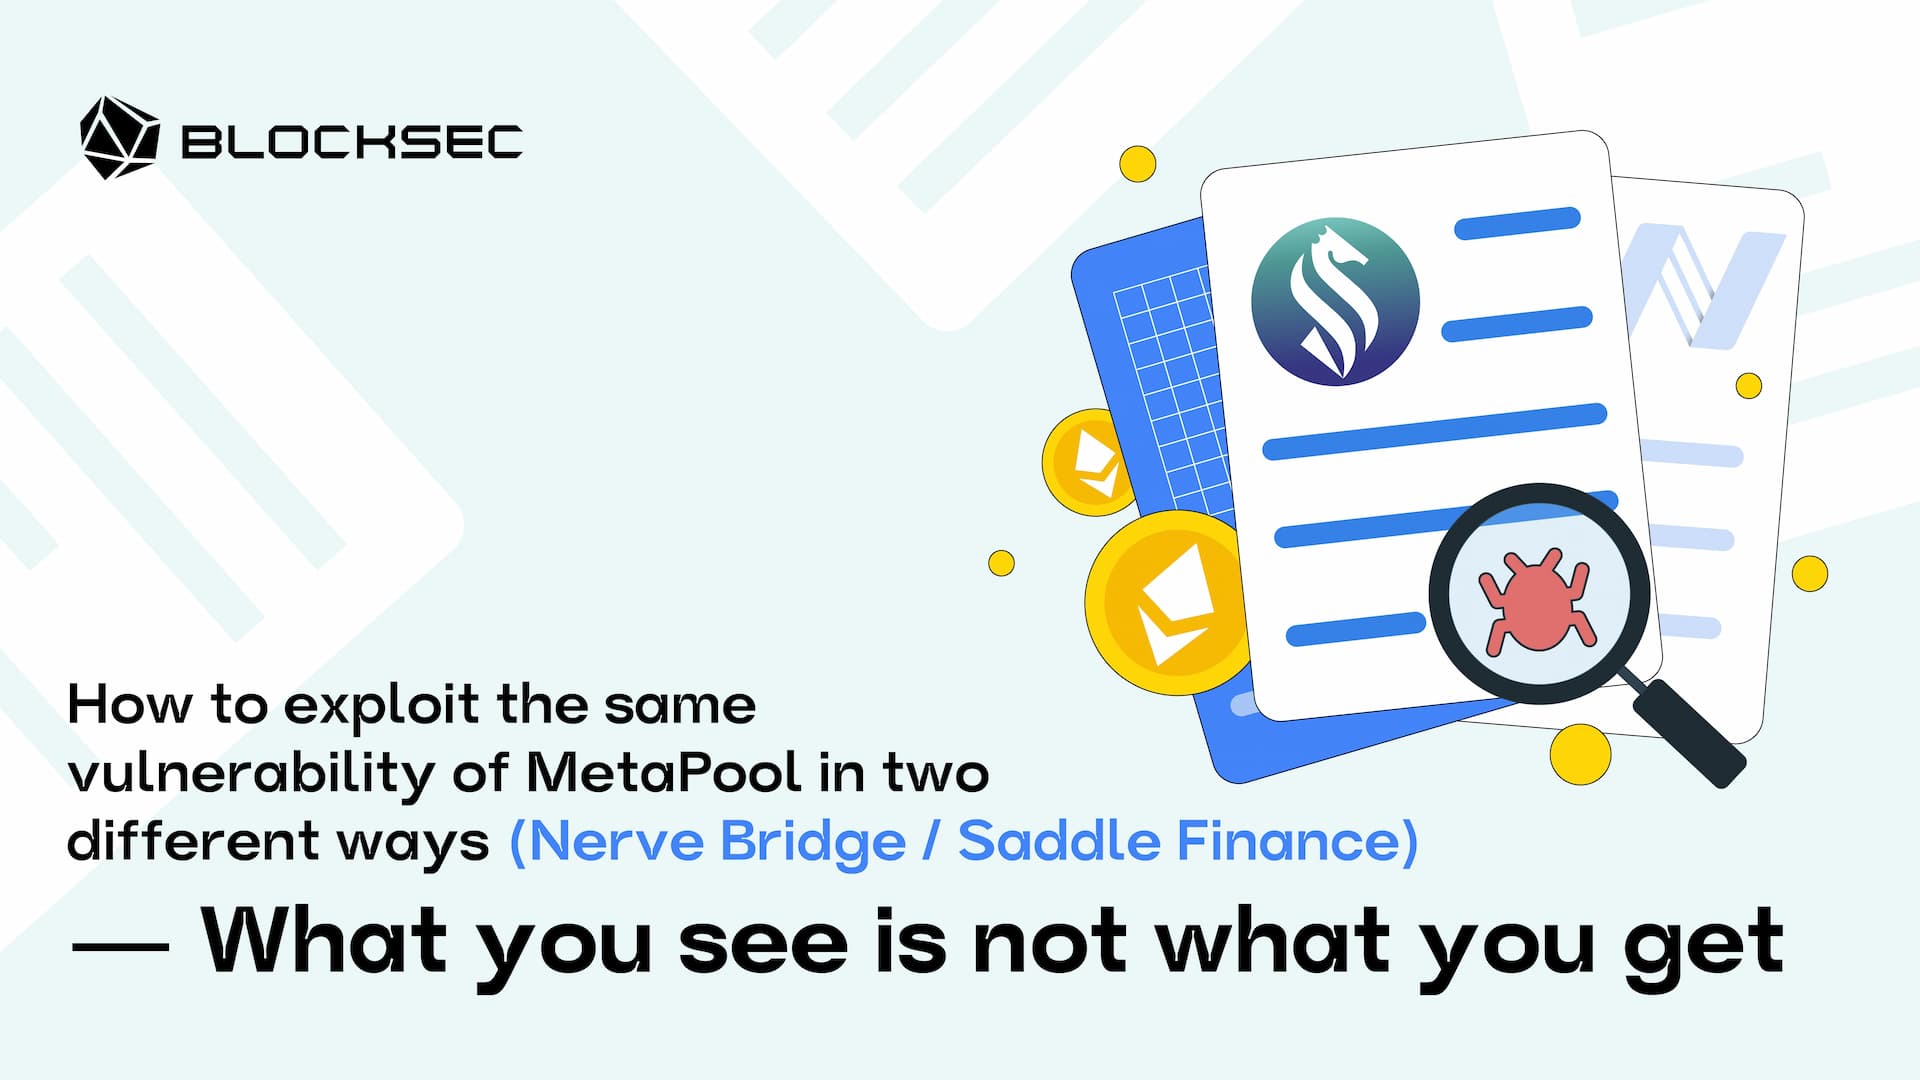 How to Exploit the Same Vulnerability of MetaPool in Two Different Ways (Nerve Bridge / Saddle Finance): What You See Is Not What You Get